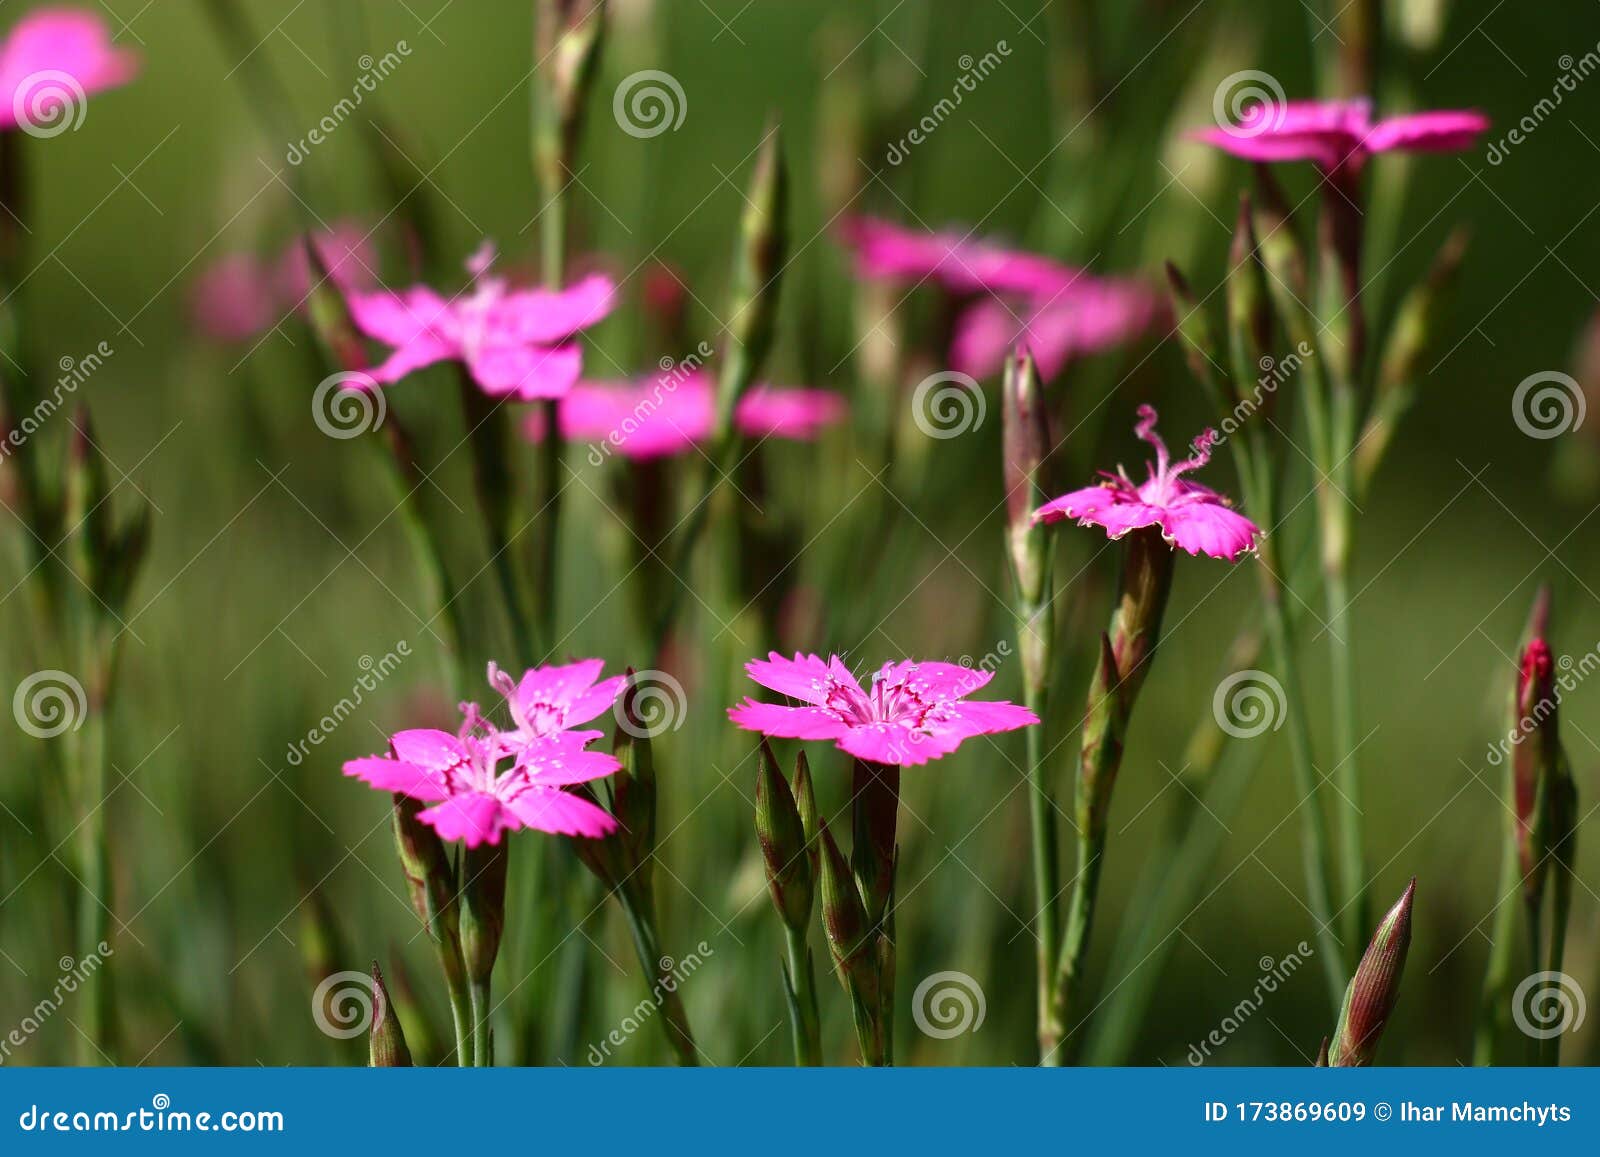 dark green background with flowers of a carnation.